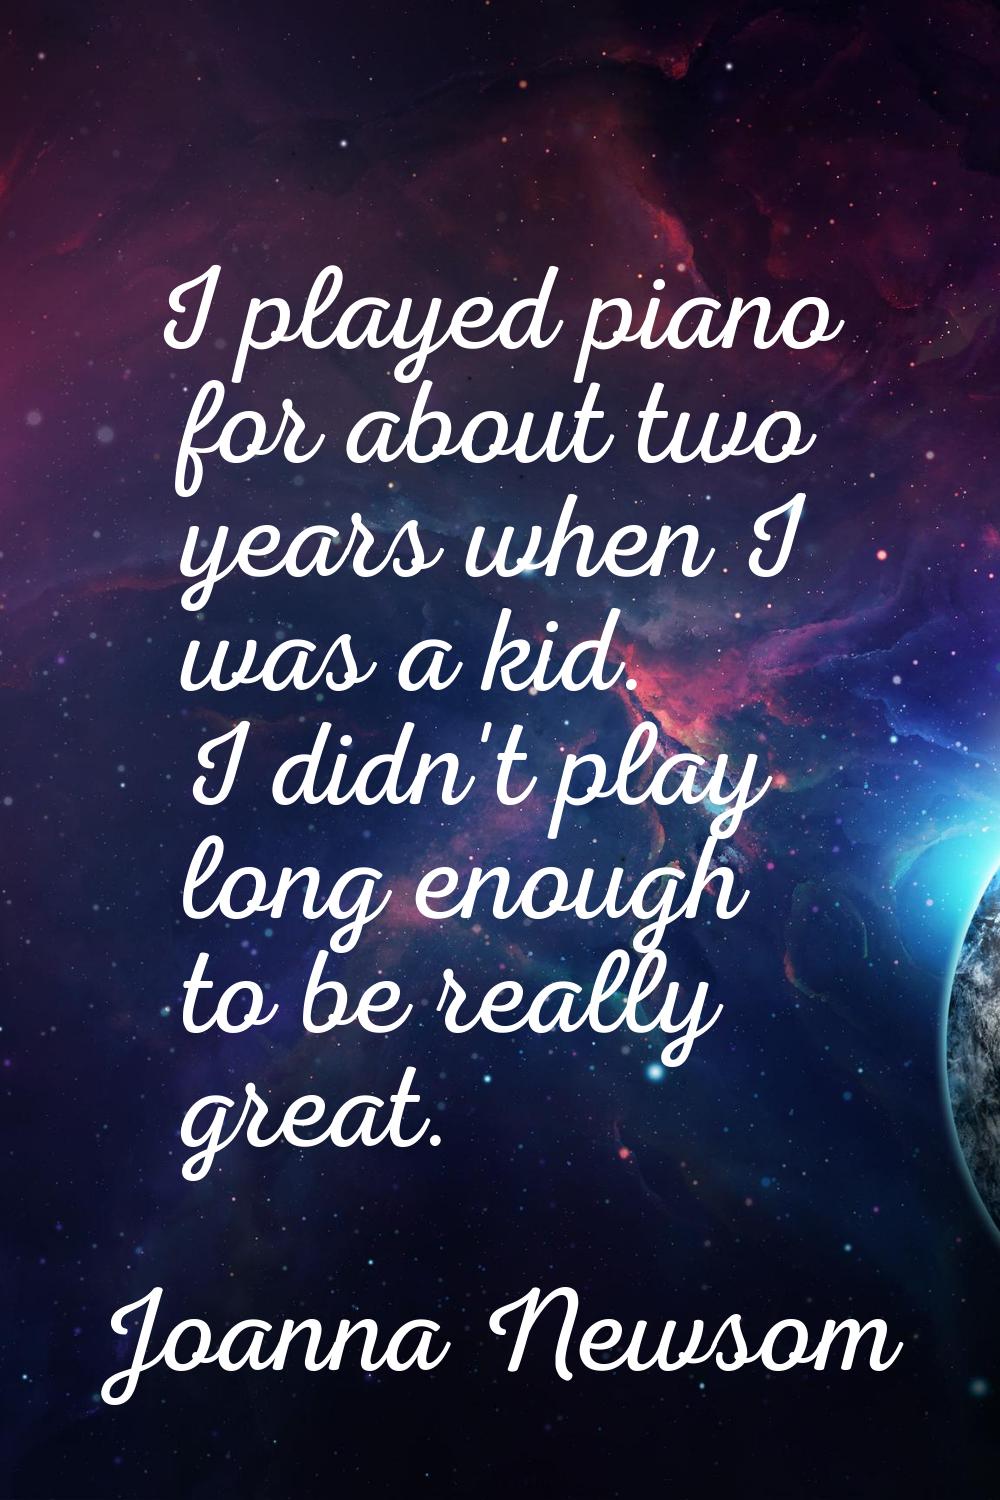 I played piano for about two years when I was a kid. I didn't play long enough to be really great.